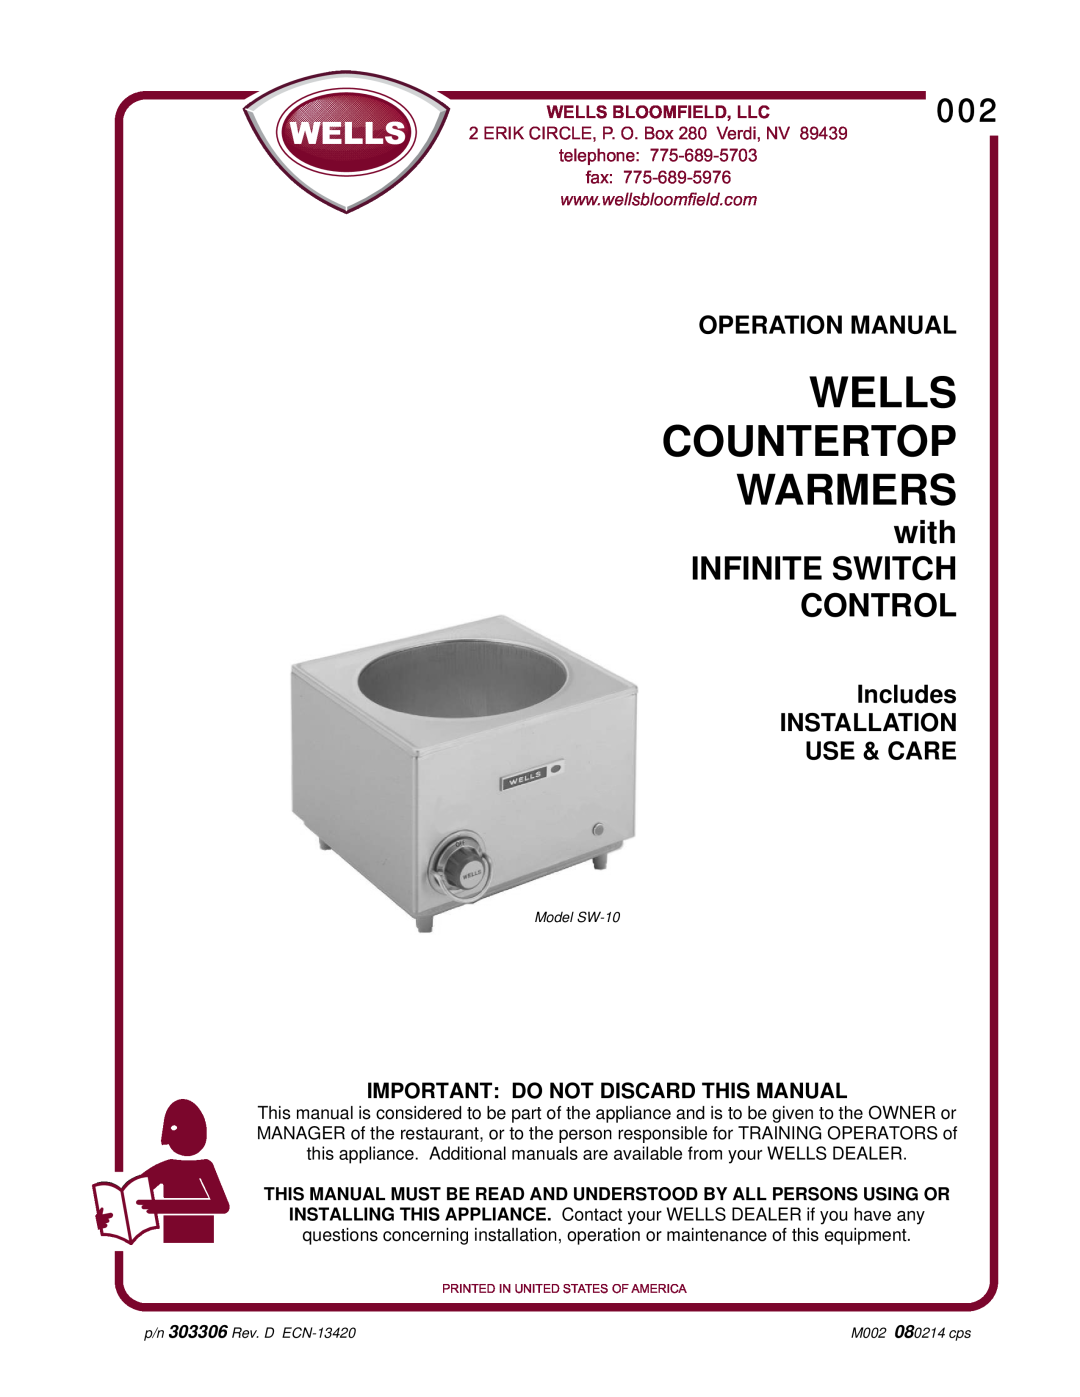 Wells SW-10 operation manual with INFINITE SWITCH CONTROL, Important Do Not Discard This Manual, Wells Countertop Warmers 